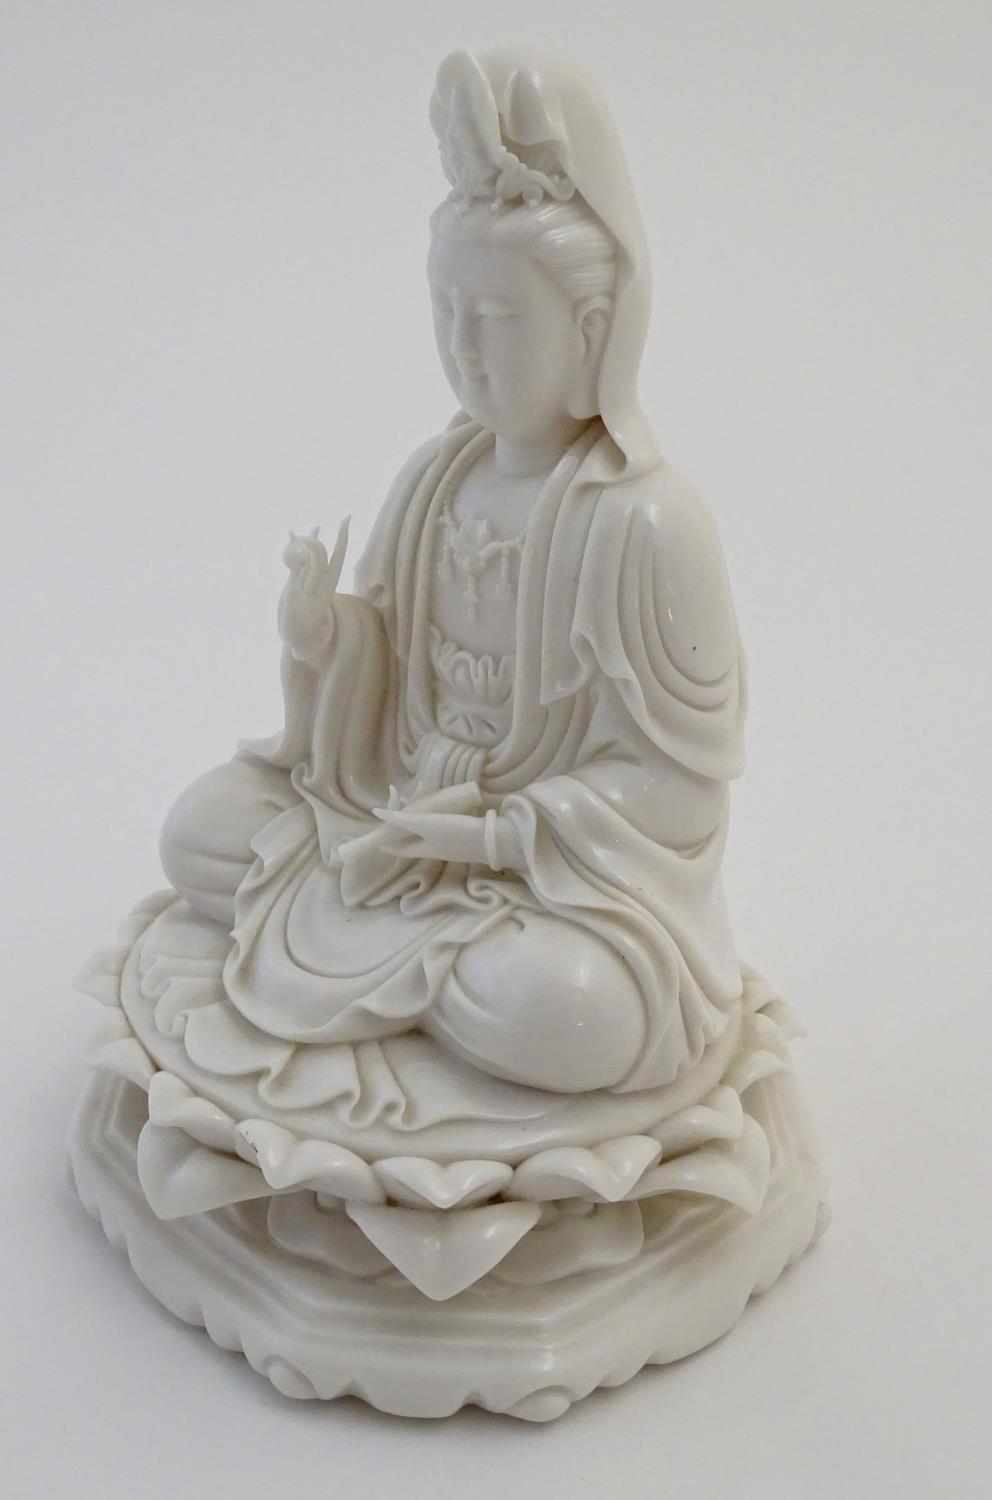 A Chinese blanc de chine figure depicting Guanyin seated on a lotus flower base. Approx. 7 1/2" high - Image 4 of 16